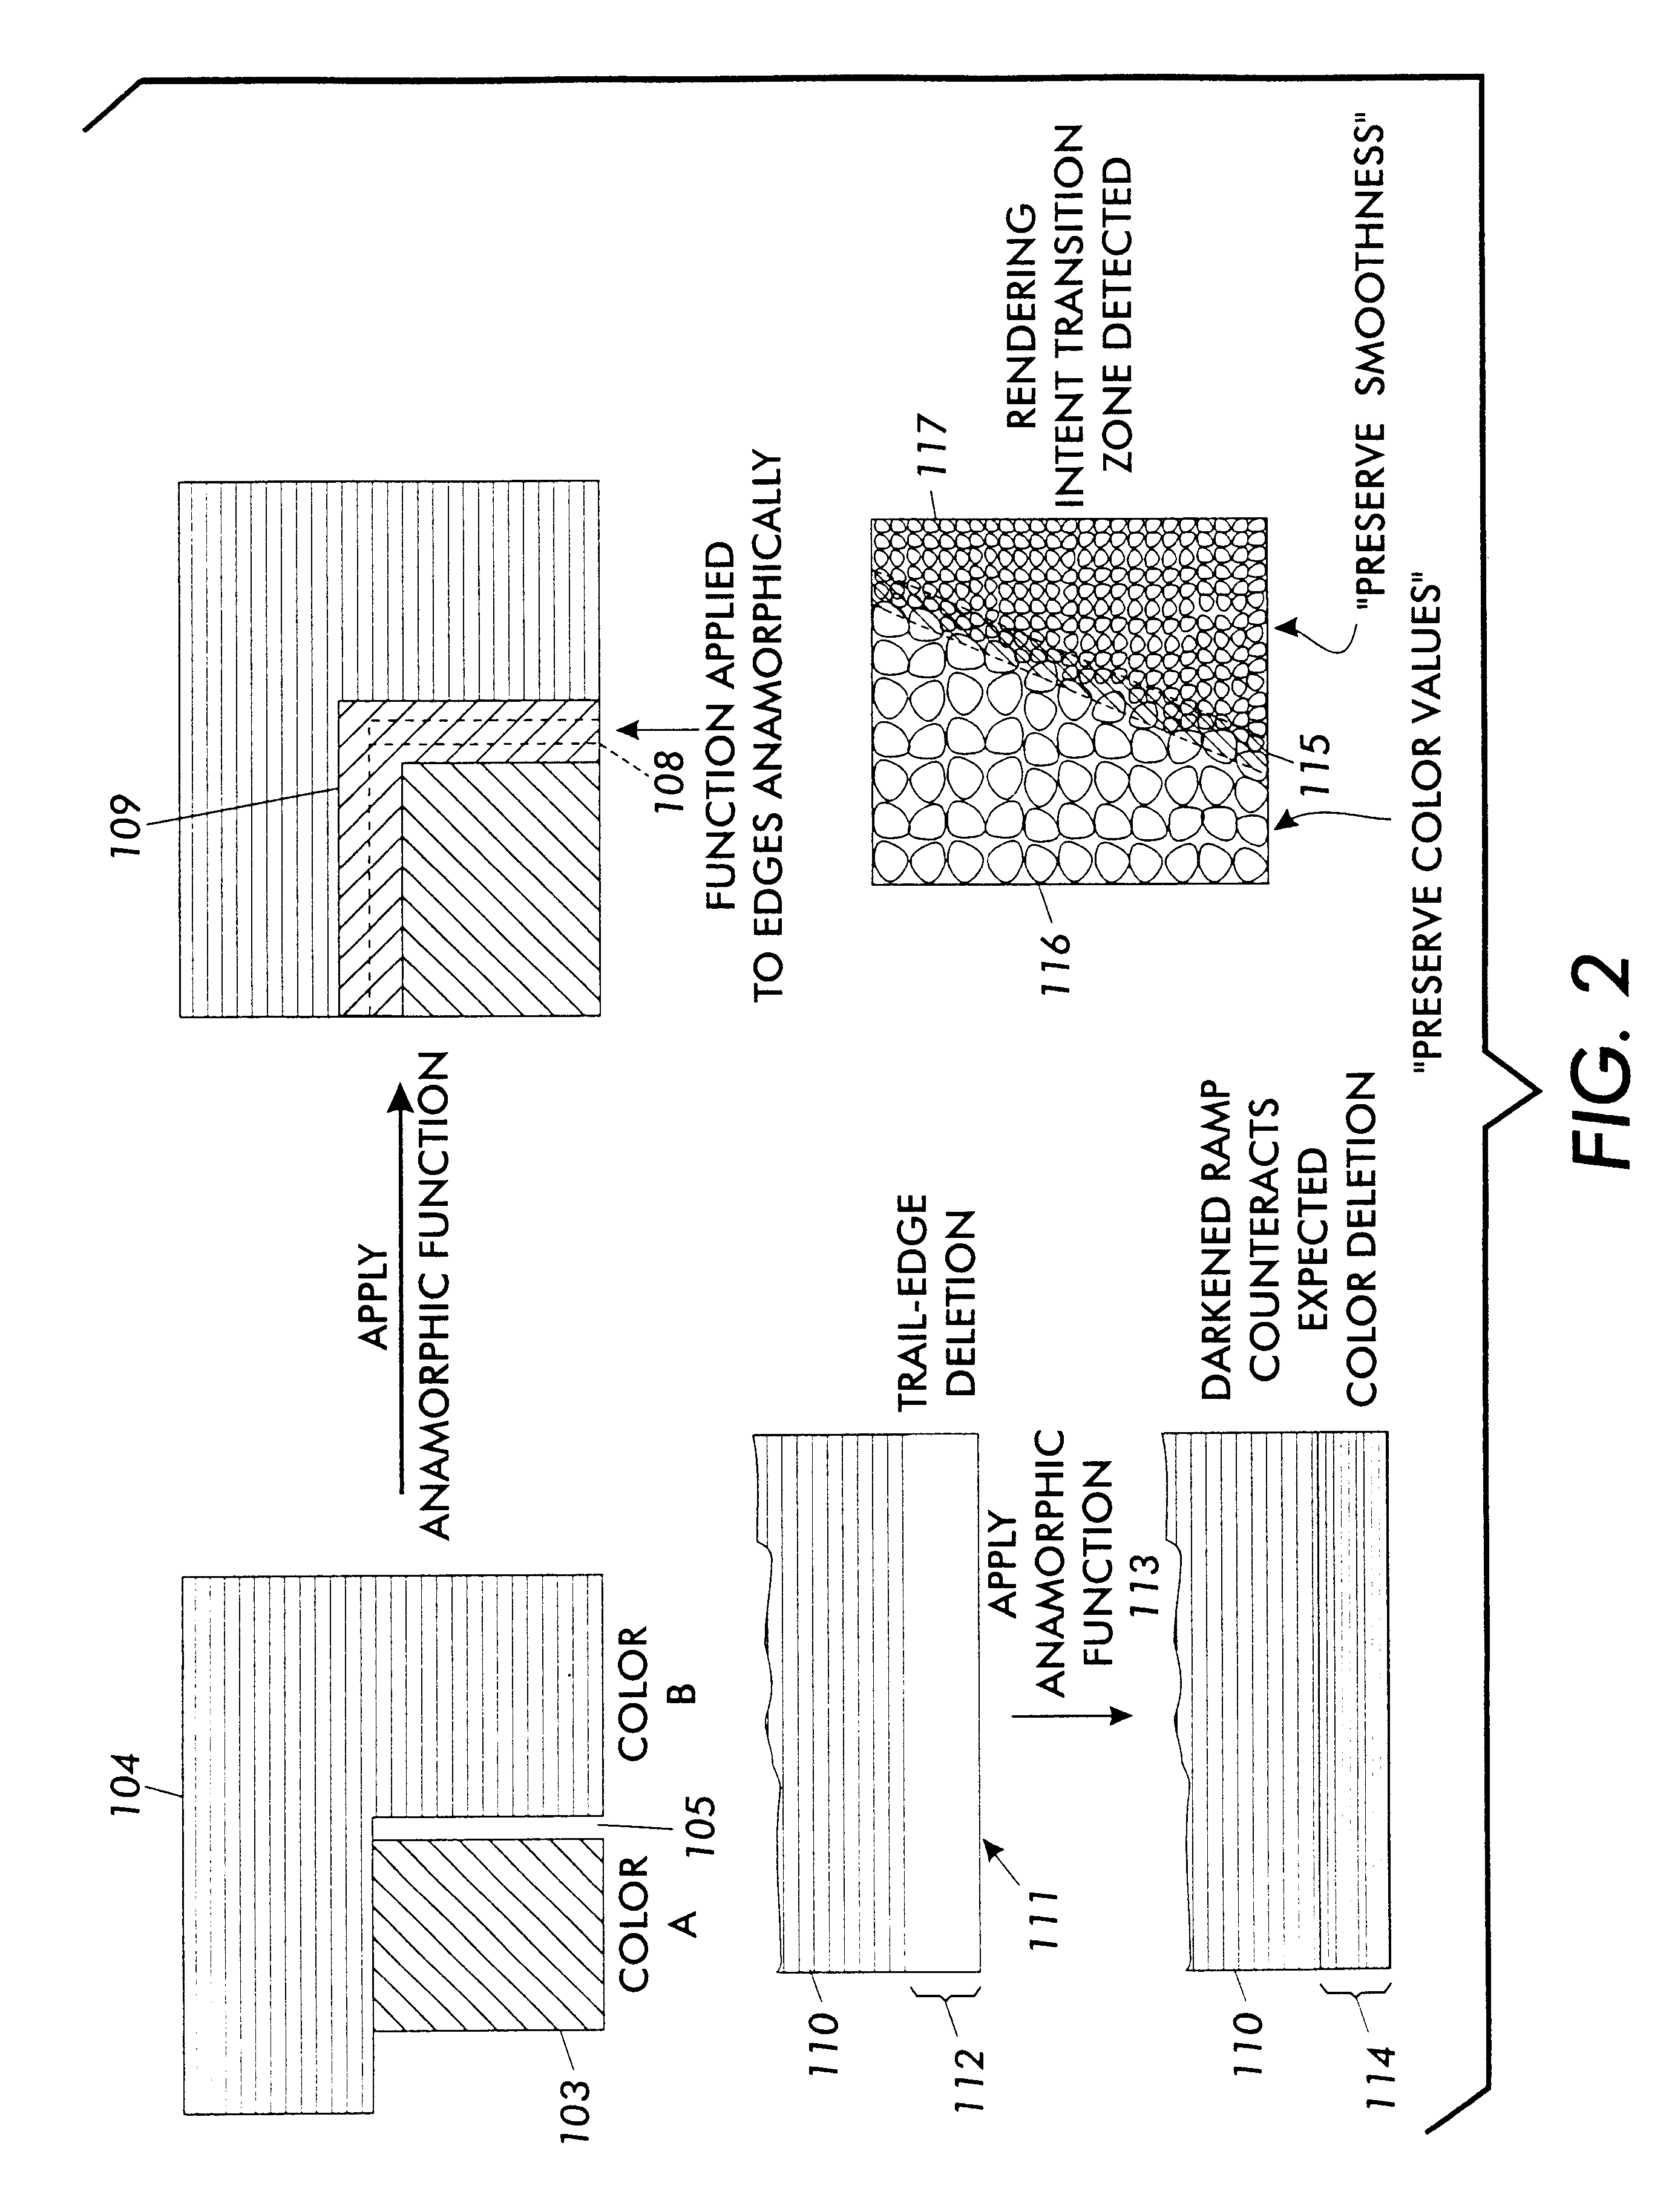 Anamorphic object optimized function application for printer defect pre-compensation